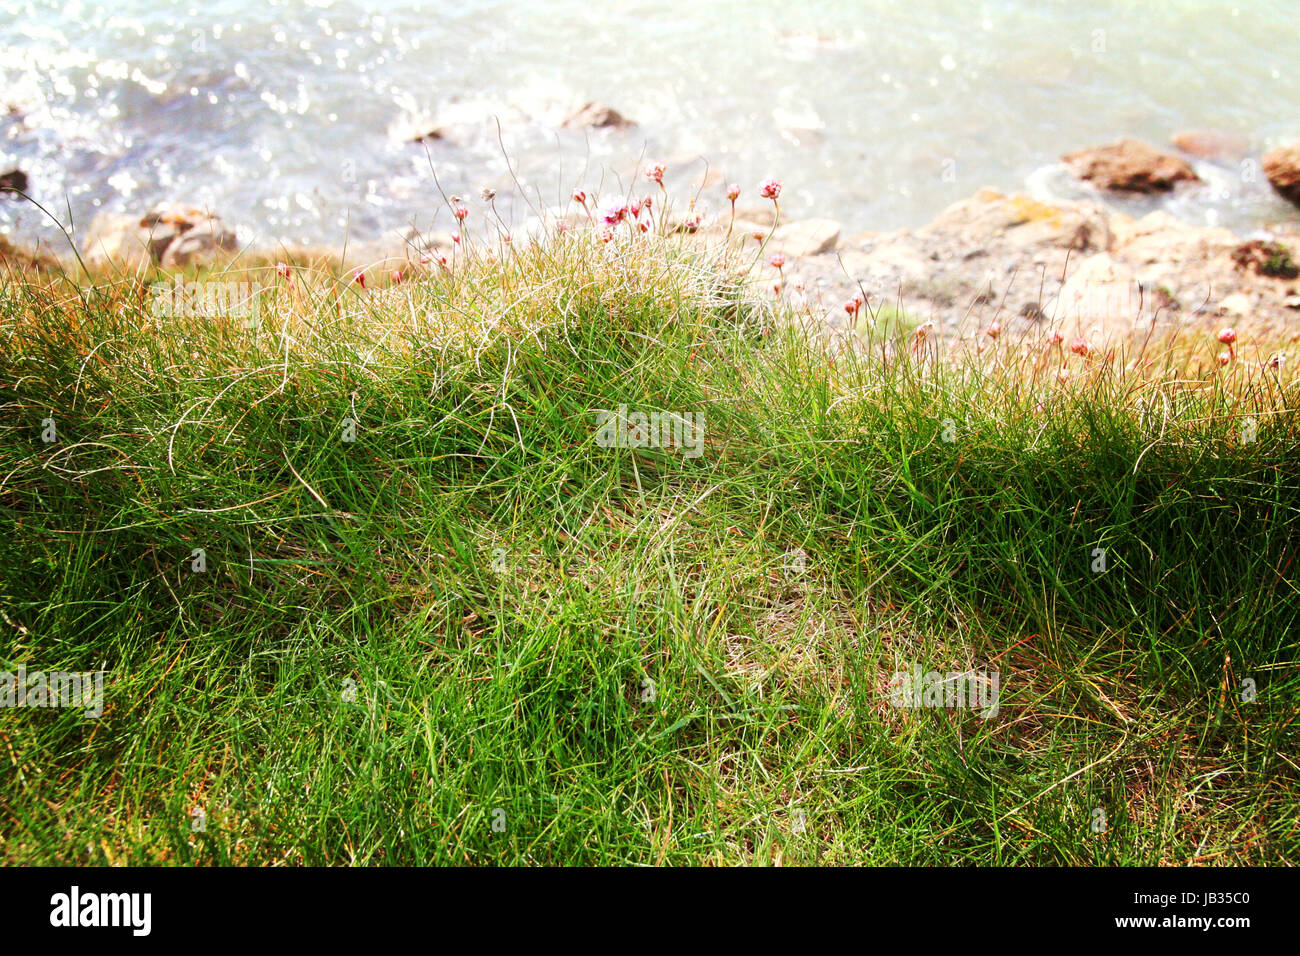 Grassy verge on the Cliff side with water in the distant background in Dublin Ireland Stock Photo